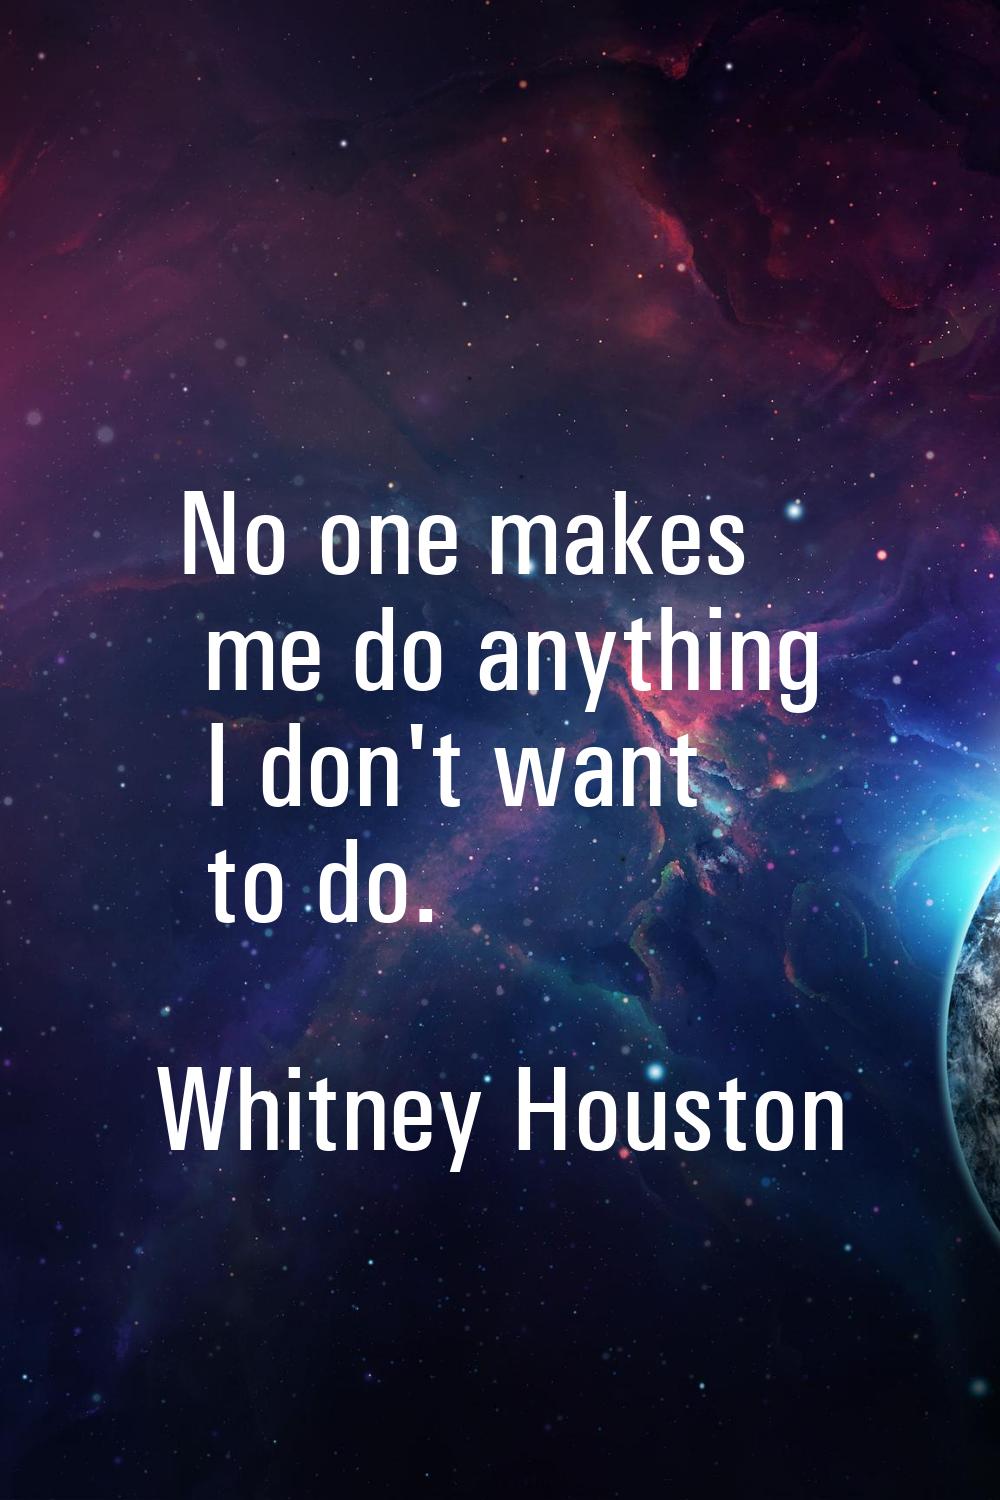 No one makes me do anything I don't want to do.